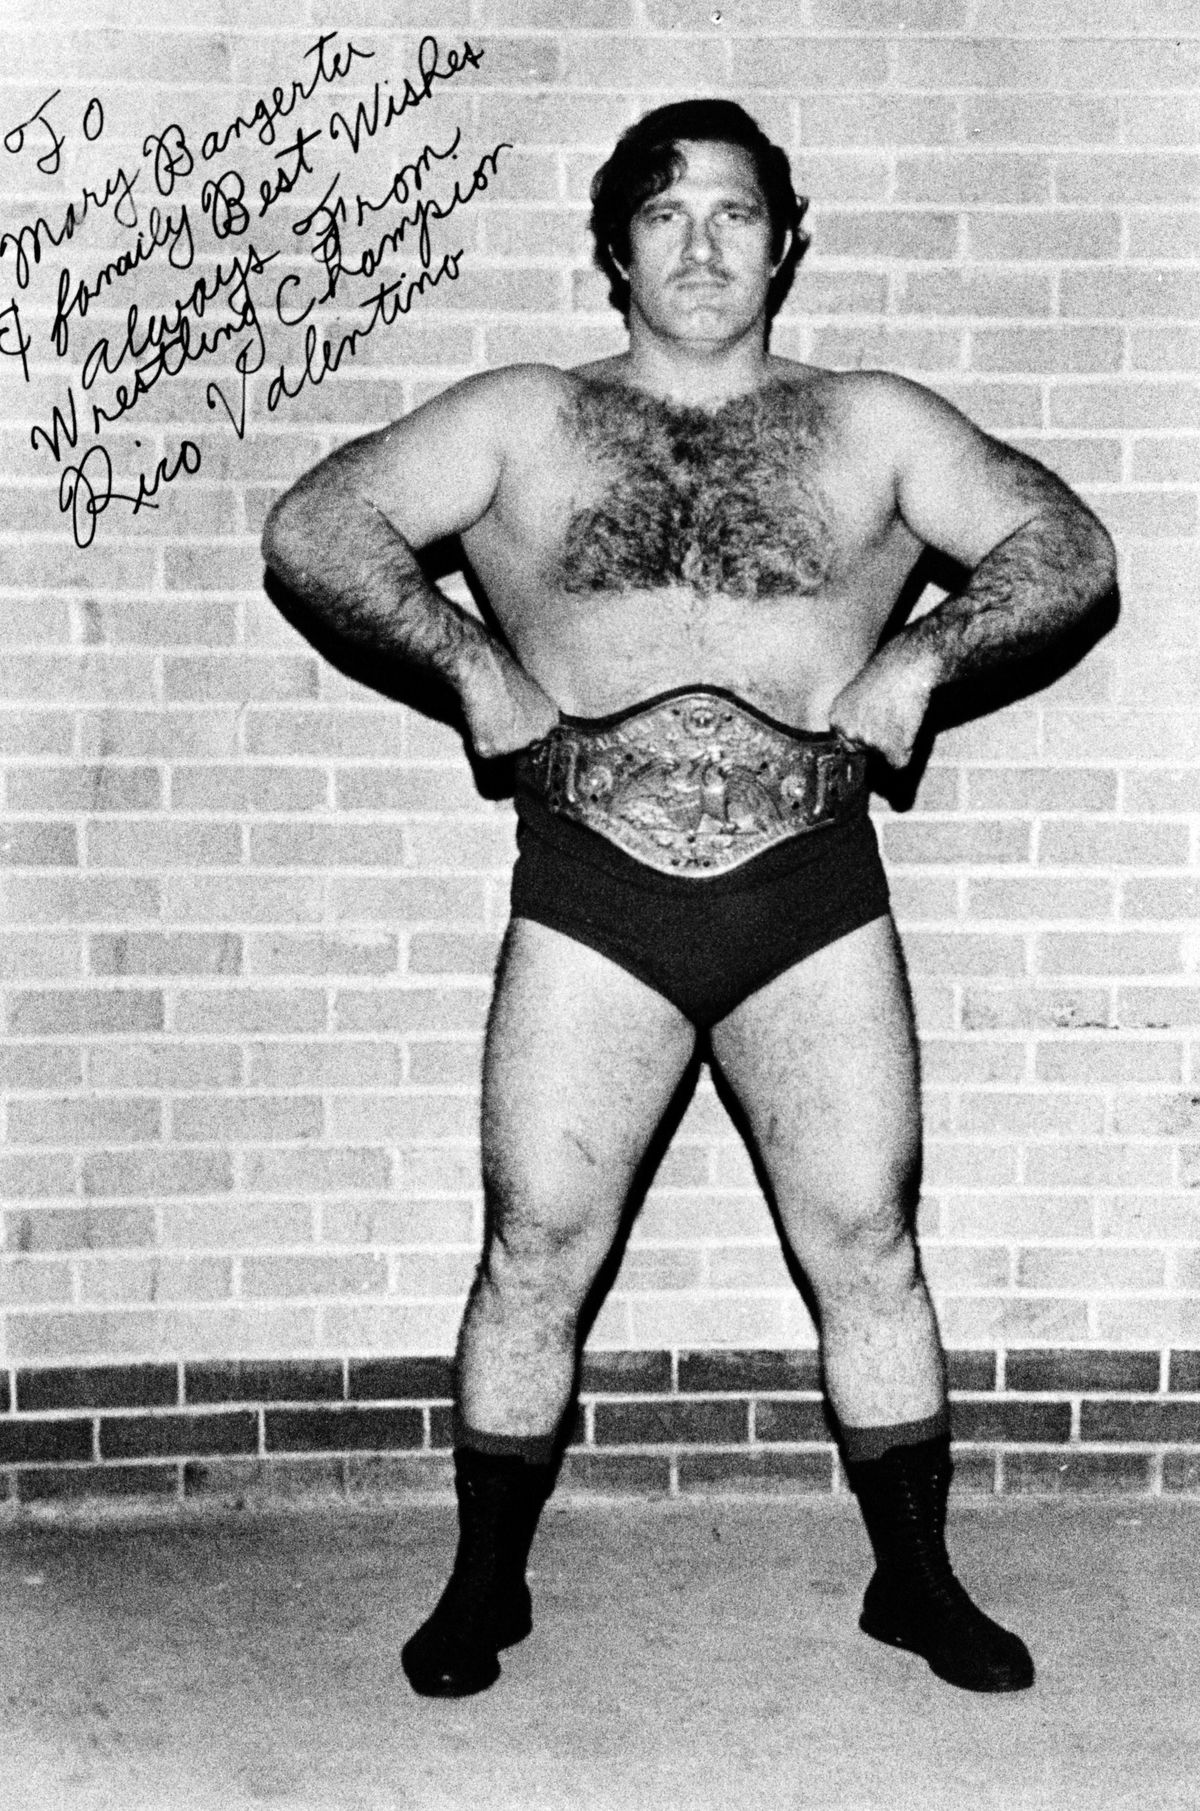 Rico Valentino was a minor-league wrestler in the 1960s and early 1970s. What many didn’t know was that he was also an undercover informant, and in the 1980s he infiltrated the Aryan Nations in Idaho, the white supremacist group led by Richard Butler.